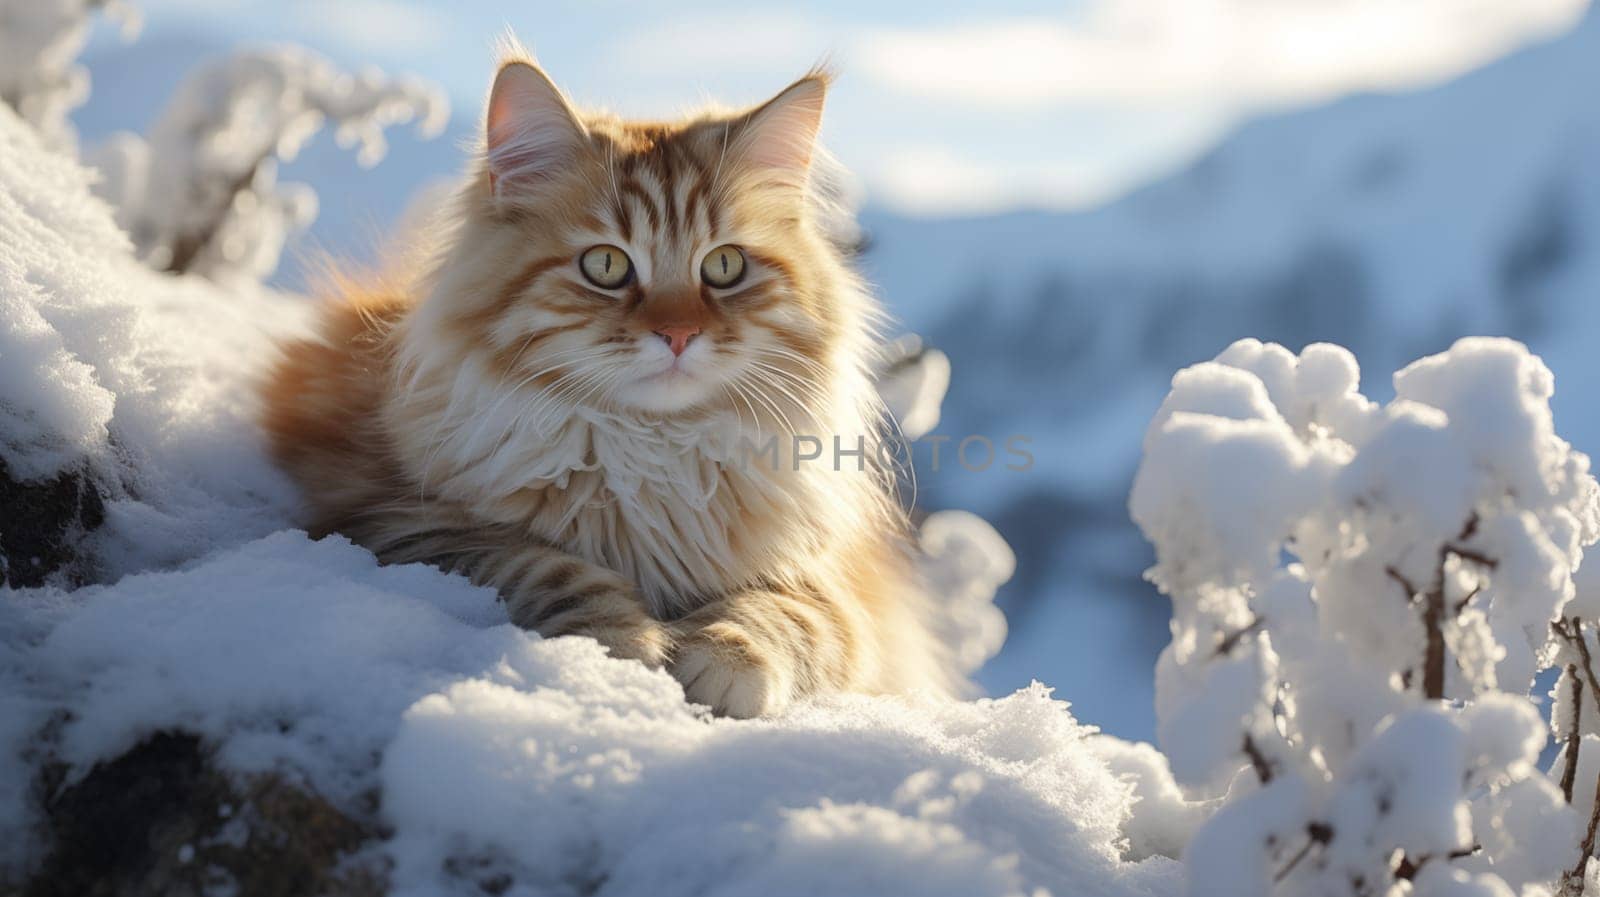 Adorable, ginger fluffy cat lie on the snow in a beautiful winter landscape.